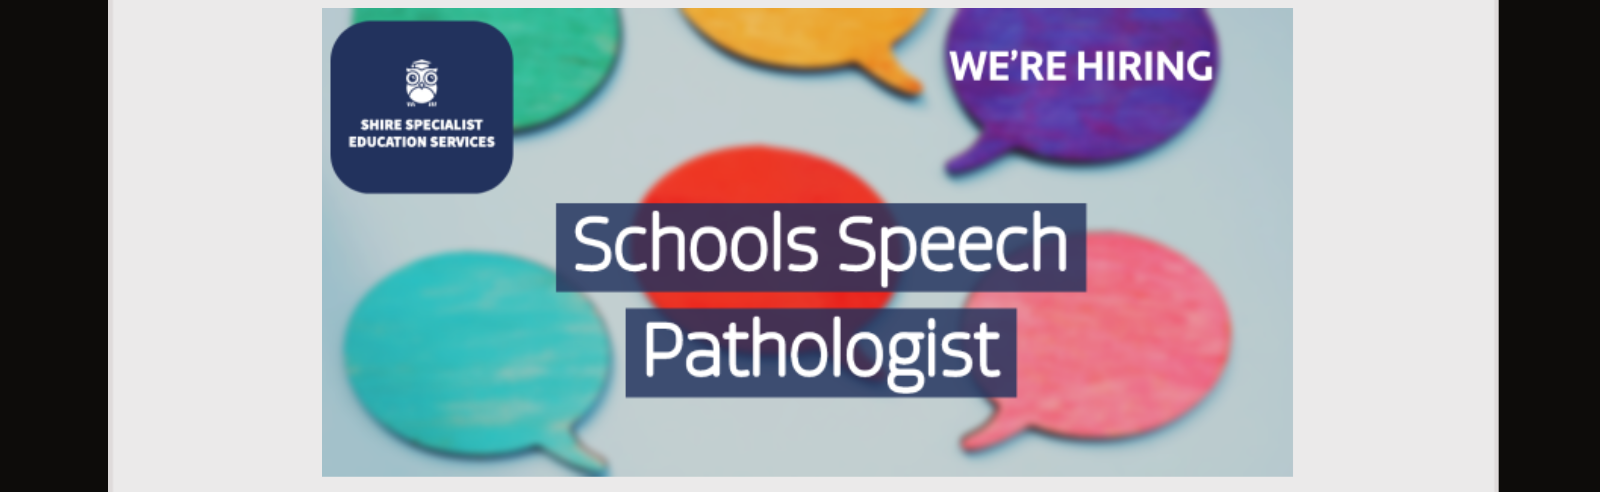 First job banner reads "Shire Specialist Education Services. We're hiring: Schools Speech Pathologist"